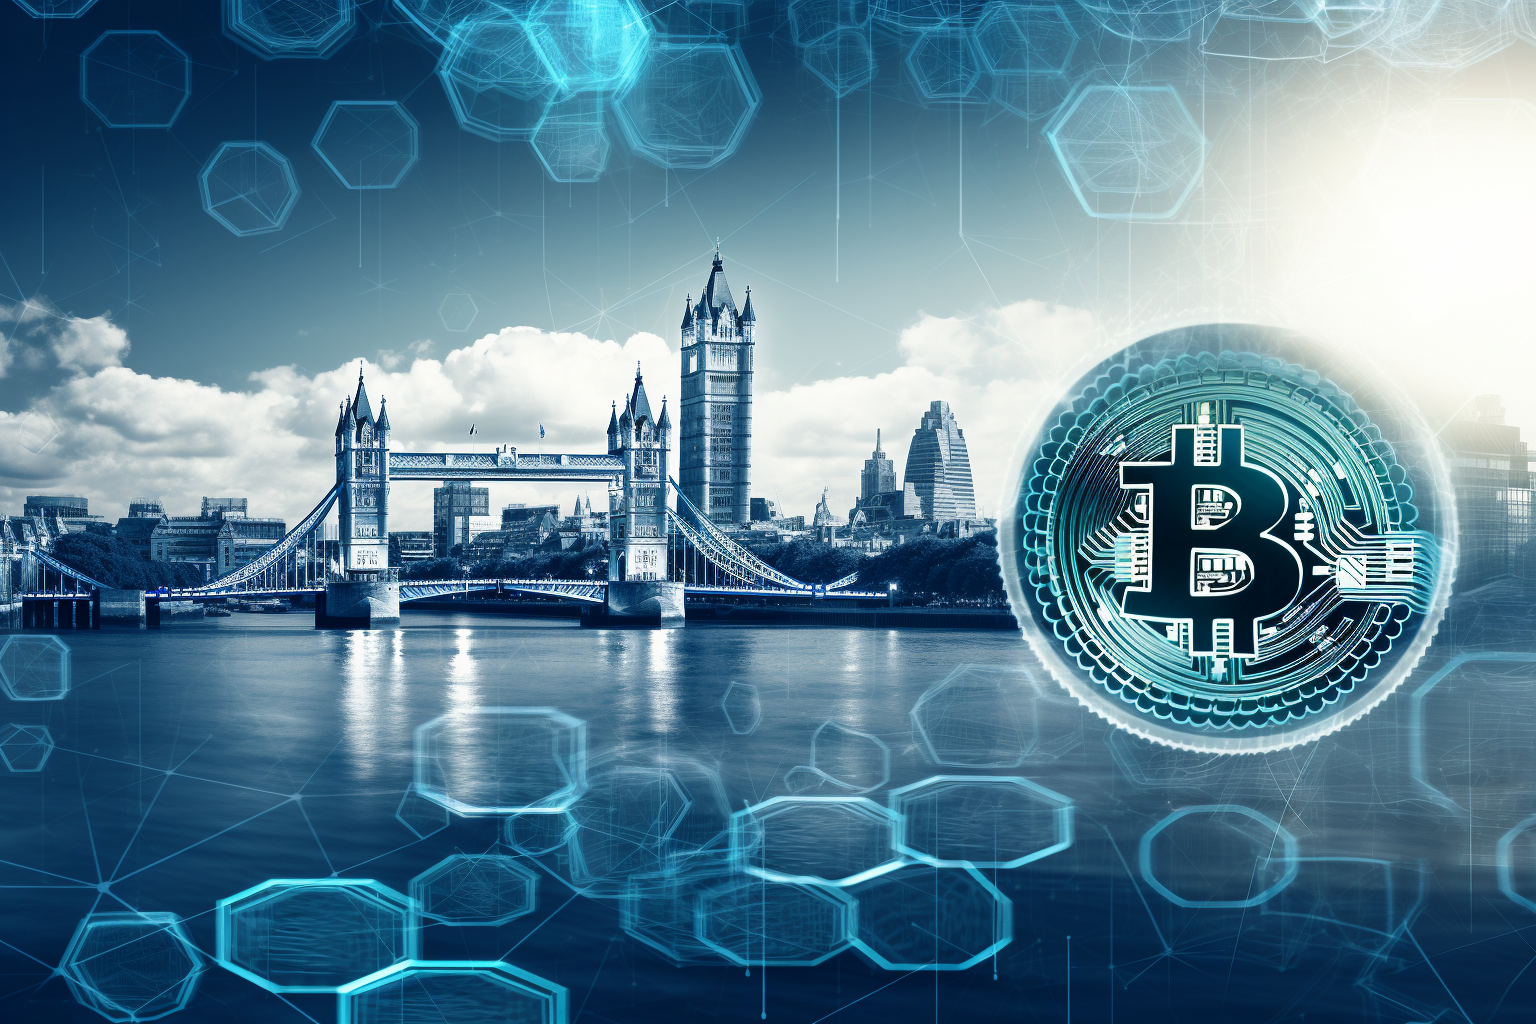 llaccount_crypto_brokerage_firm_from_london._Image_should_have__dda479b9-4145-4203-90e0-c020fd990eb3